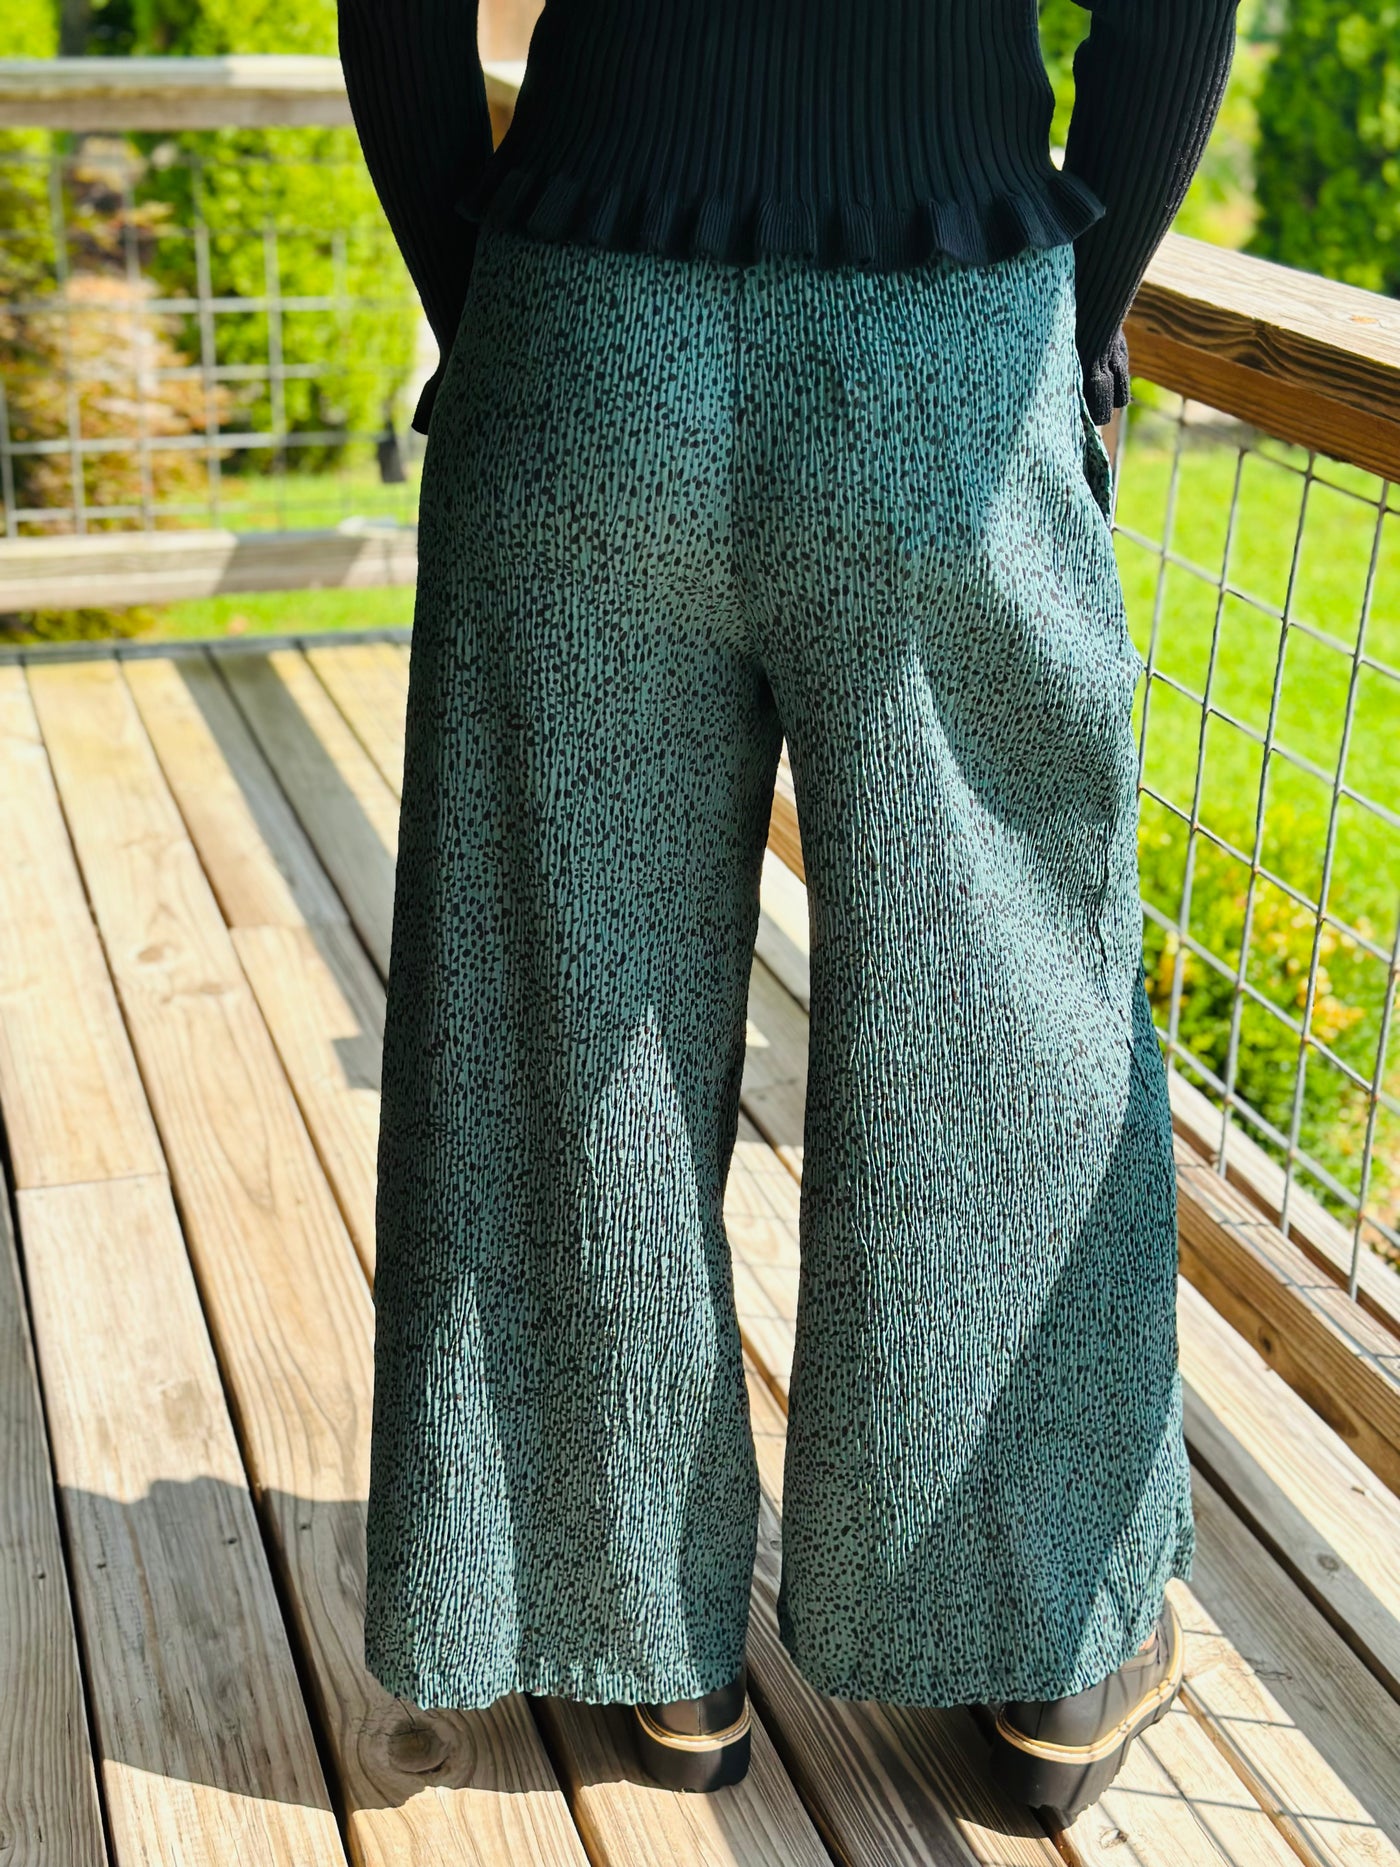 Teal Dotted High-Waist Crinkled Wide Leg Pants with Pockets